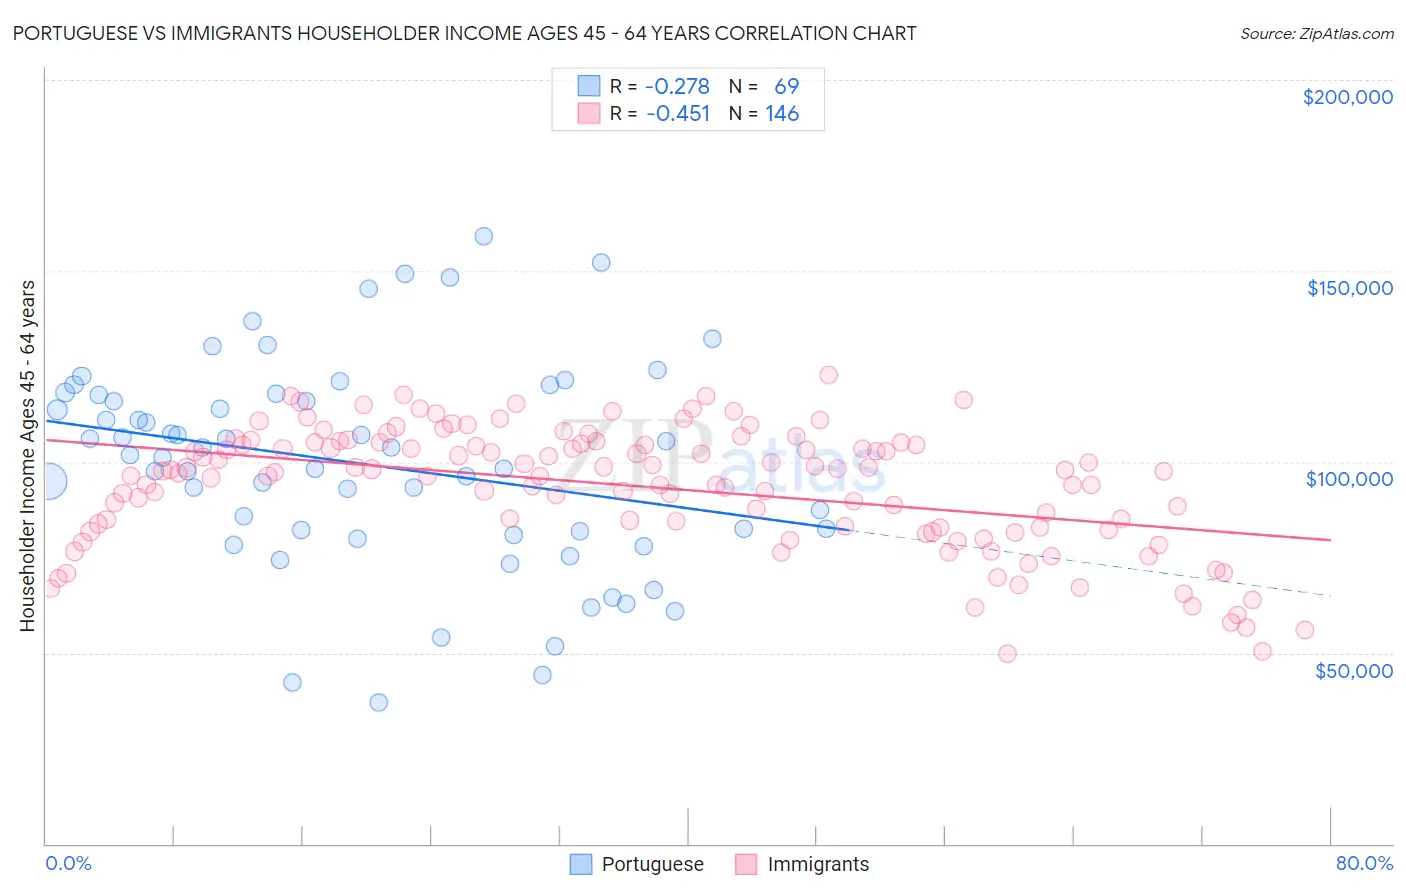 Portuguese vs Immigrants Householder Income Ages 45 - 64 years